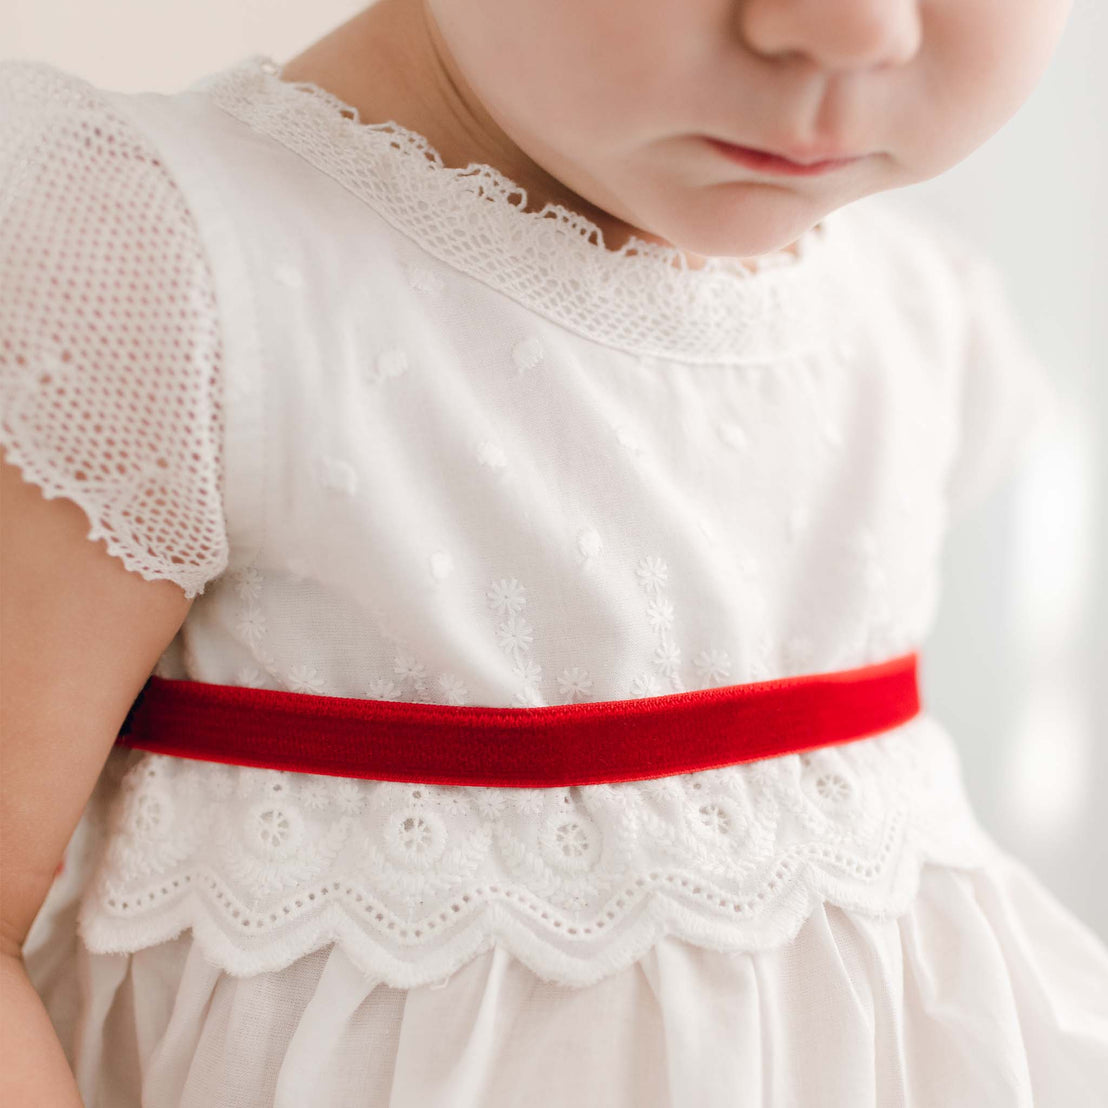 Close-up of a toddler in the Emily Dress & Bloomers with a red sash, focusing on the detailed lace and fabric texture. The child's face is partially visible, looking downward.